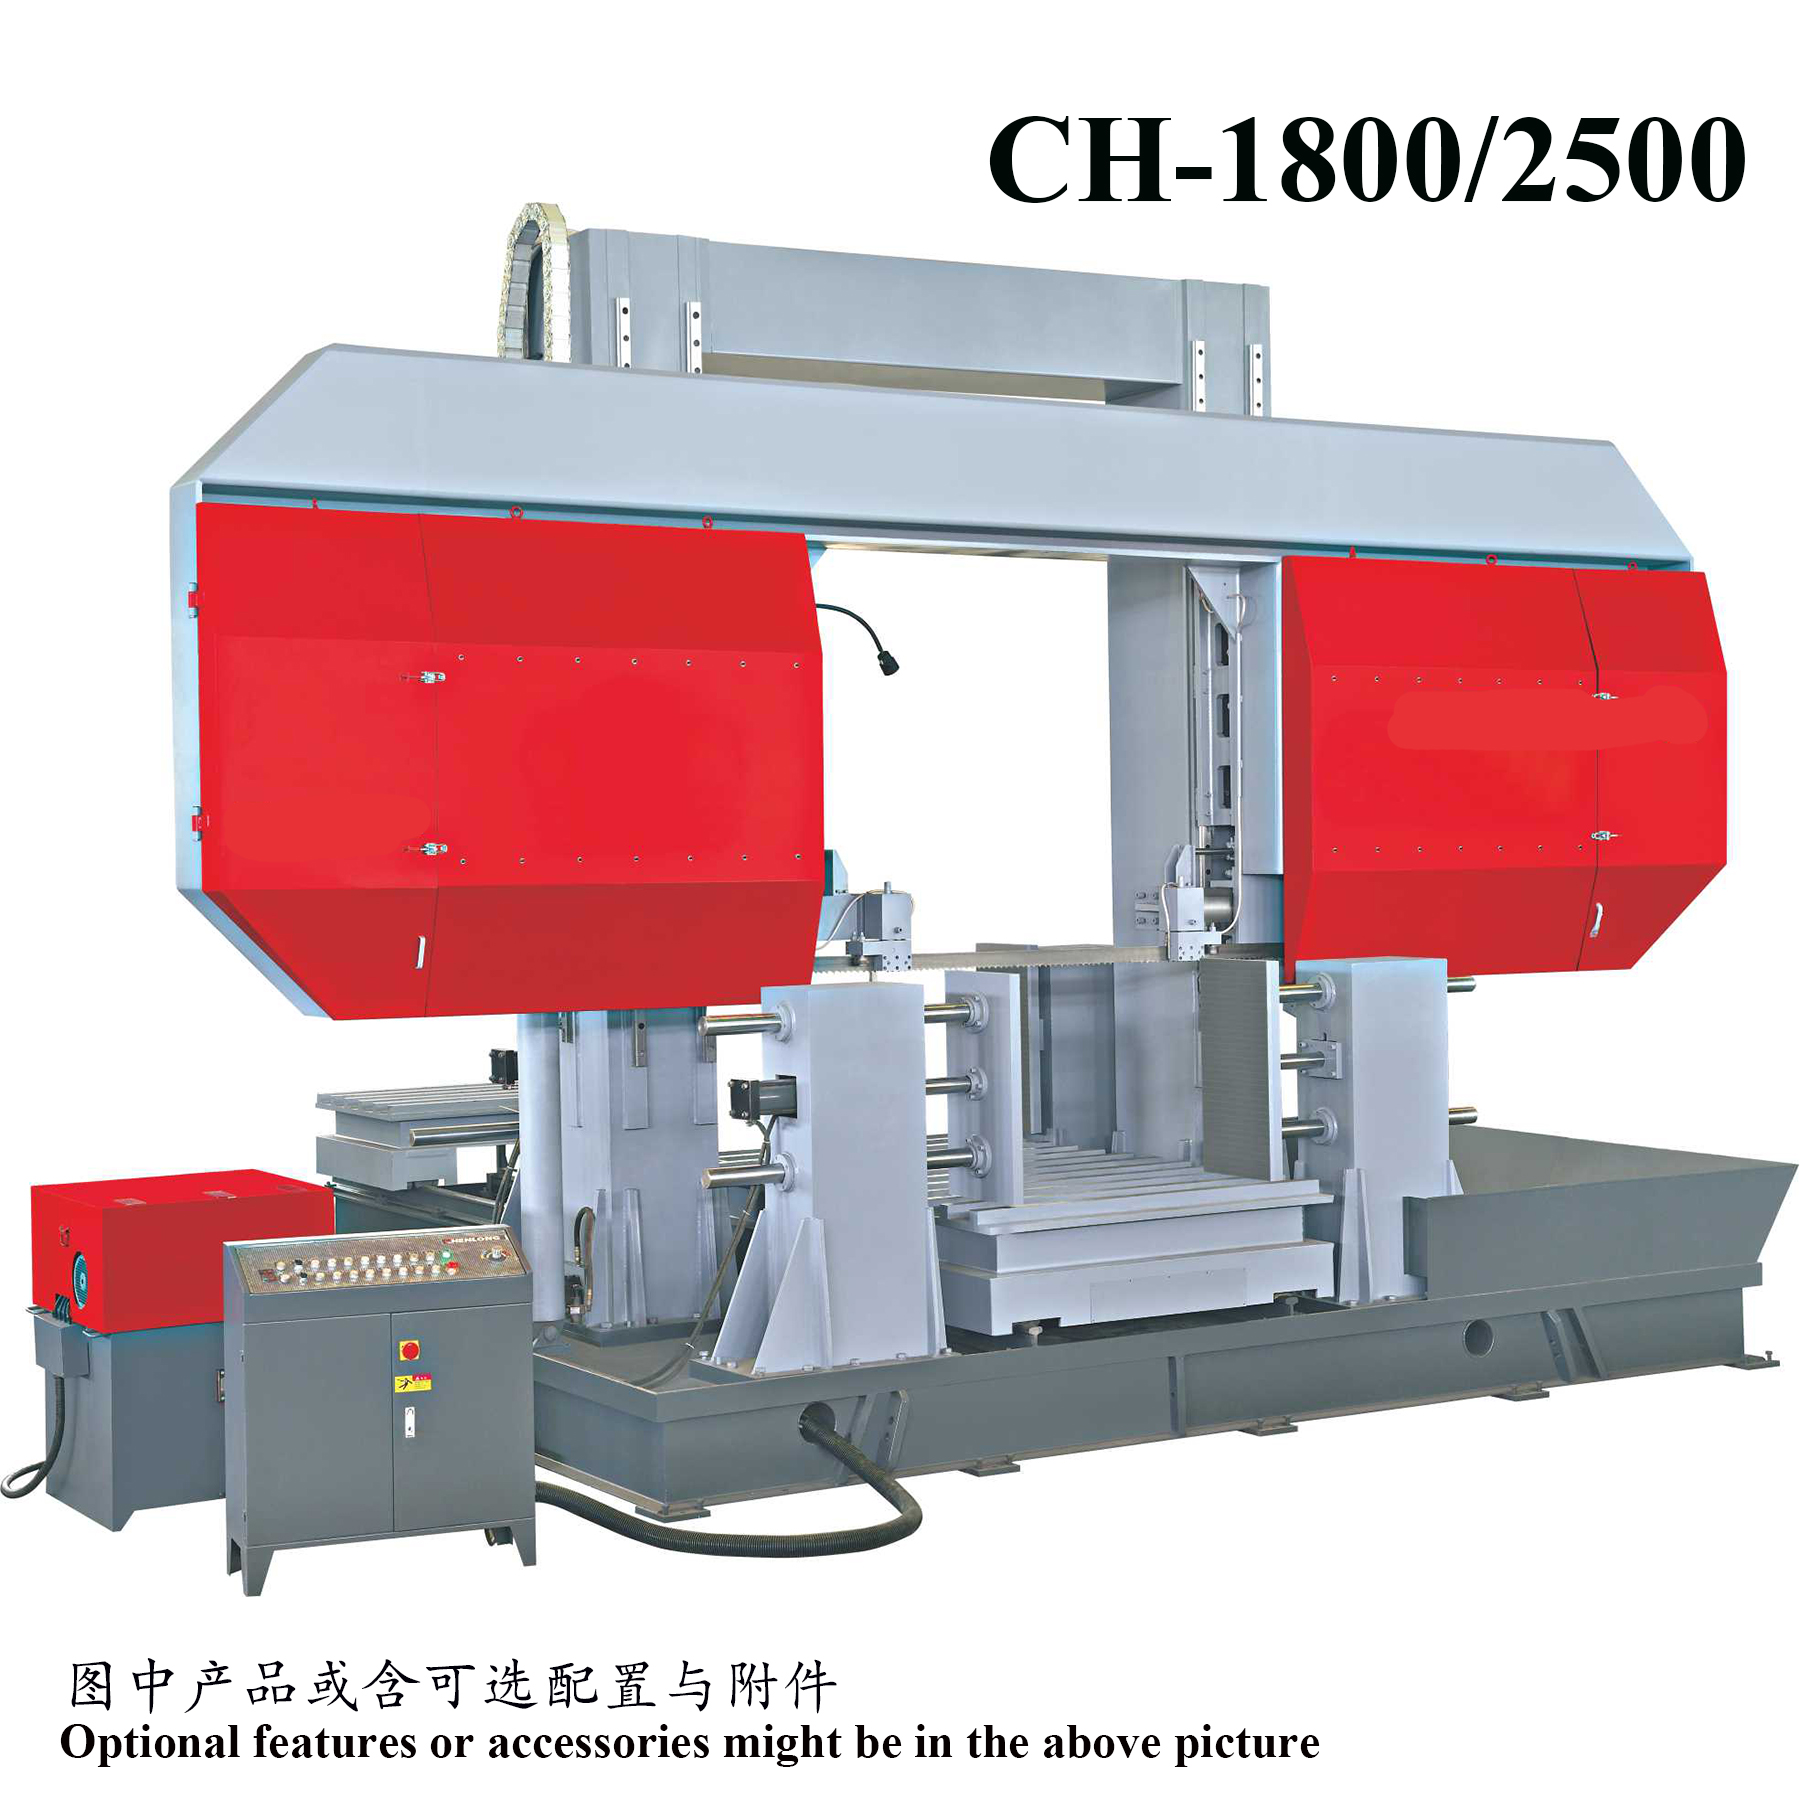 Industrial sawing machine